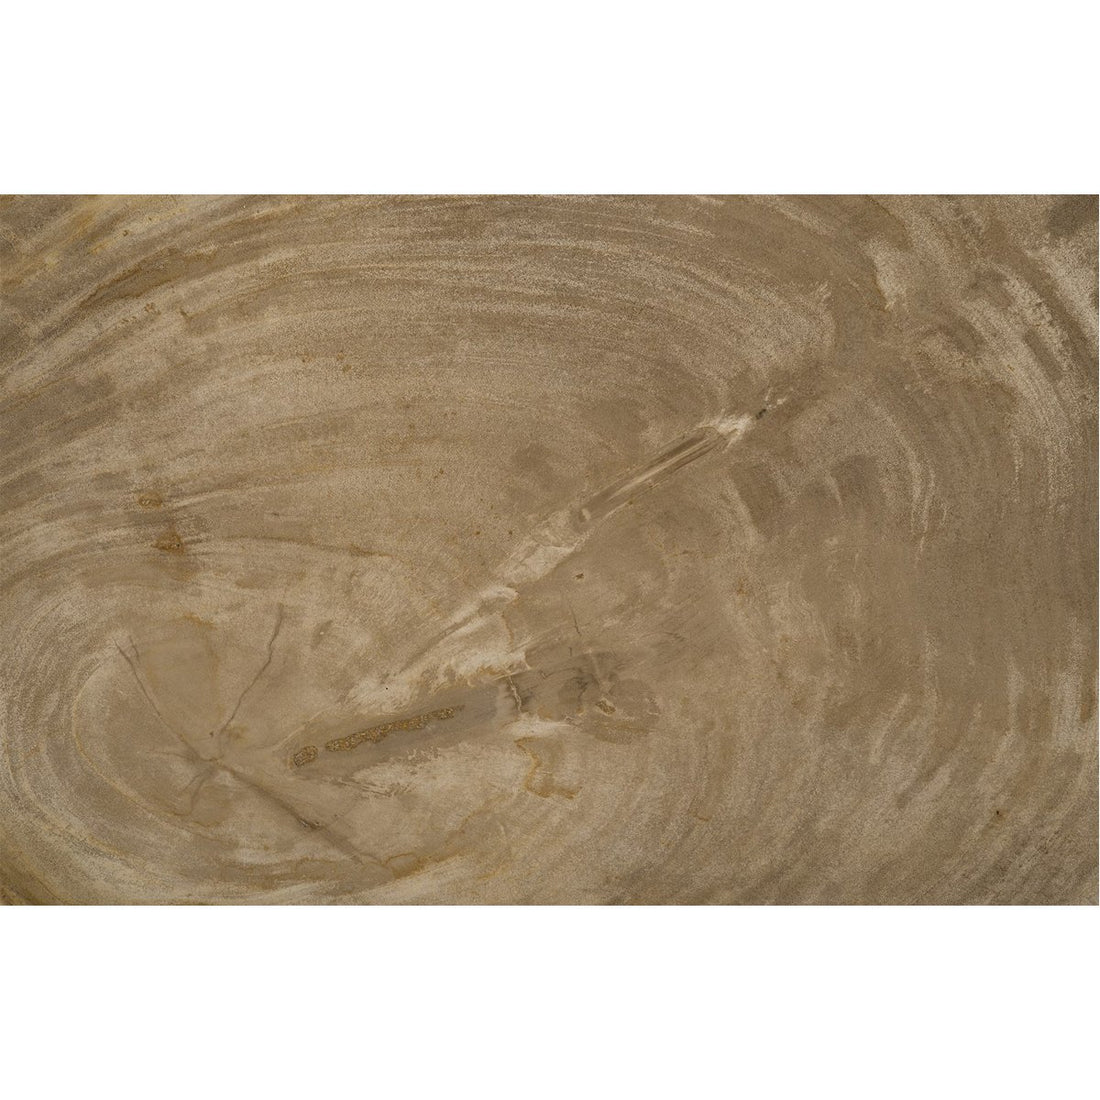 Phillips Collection Petrified Wood Tray